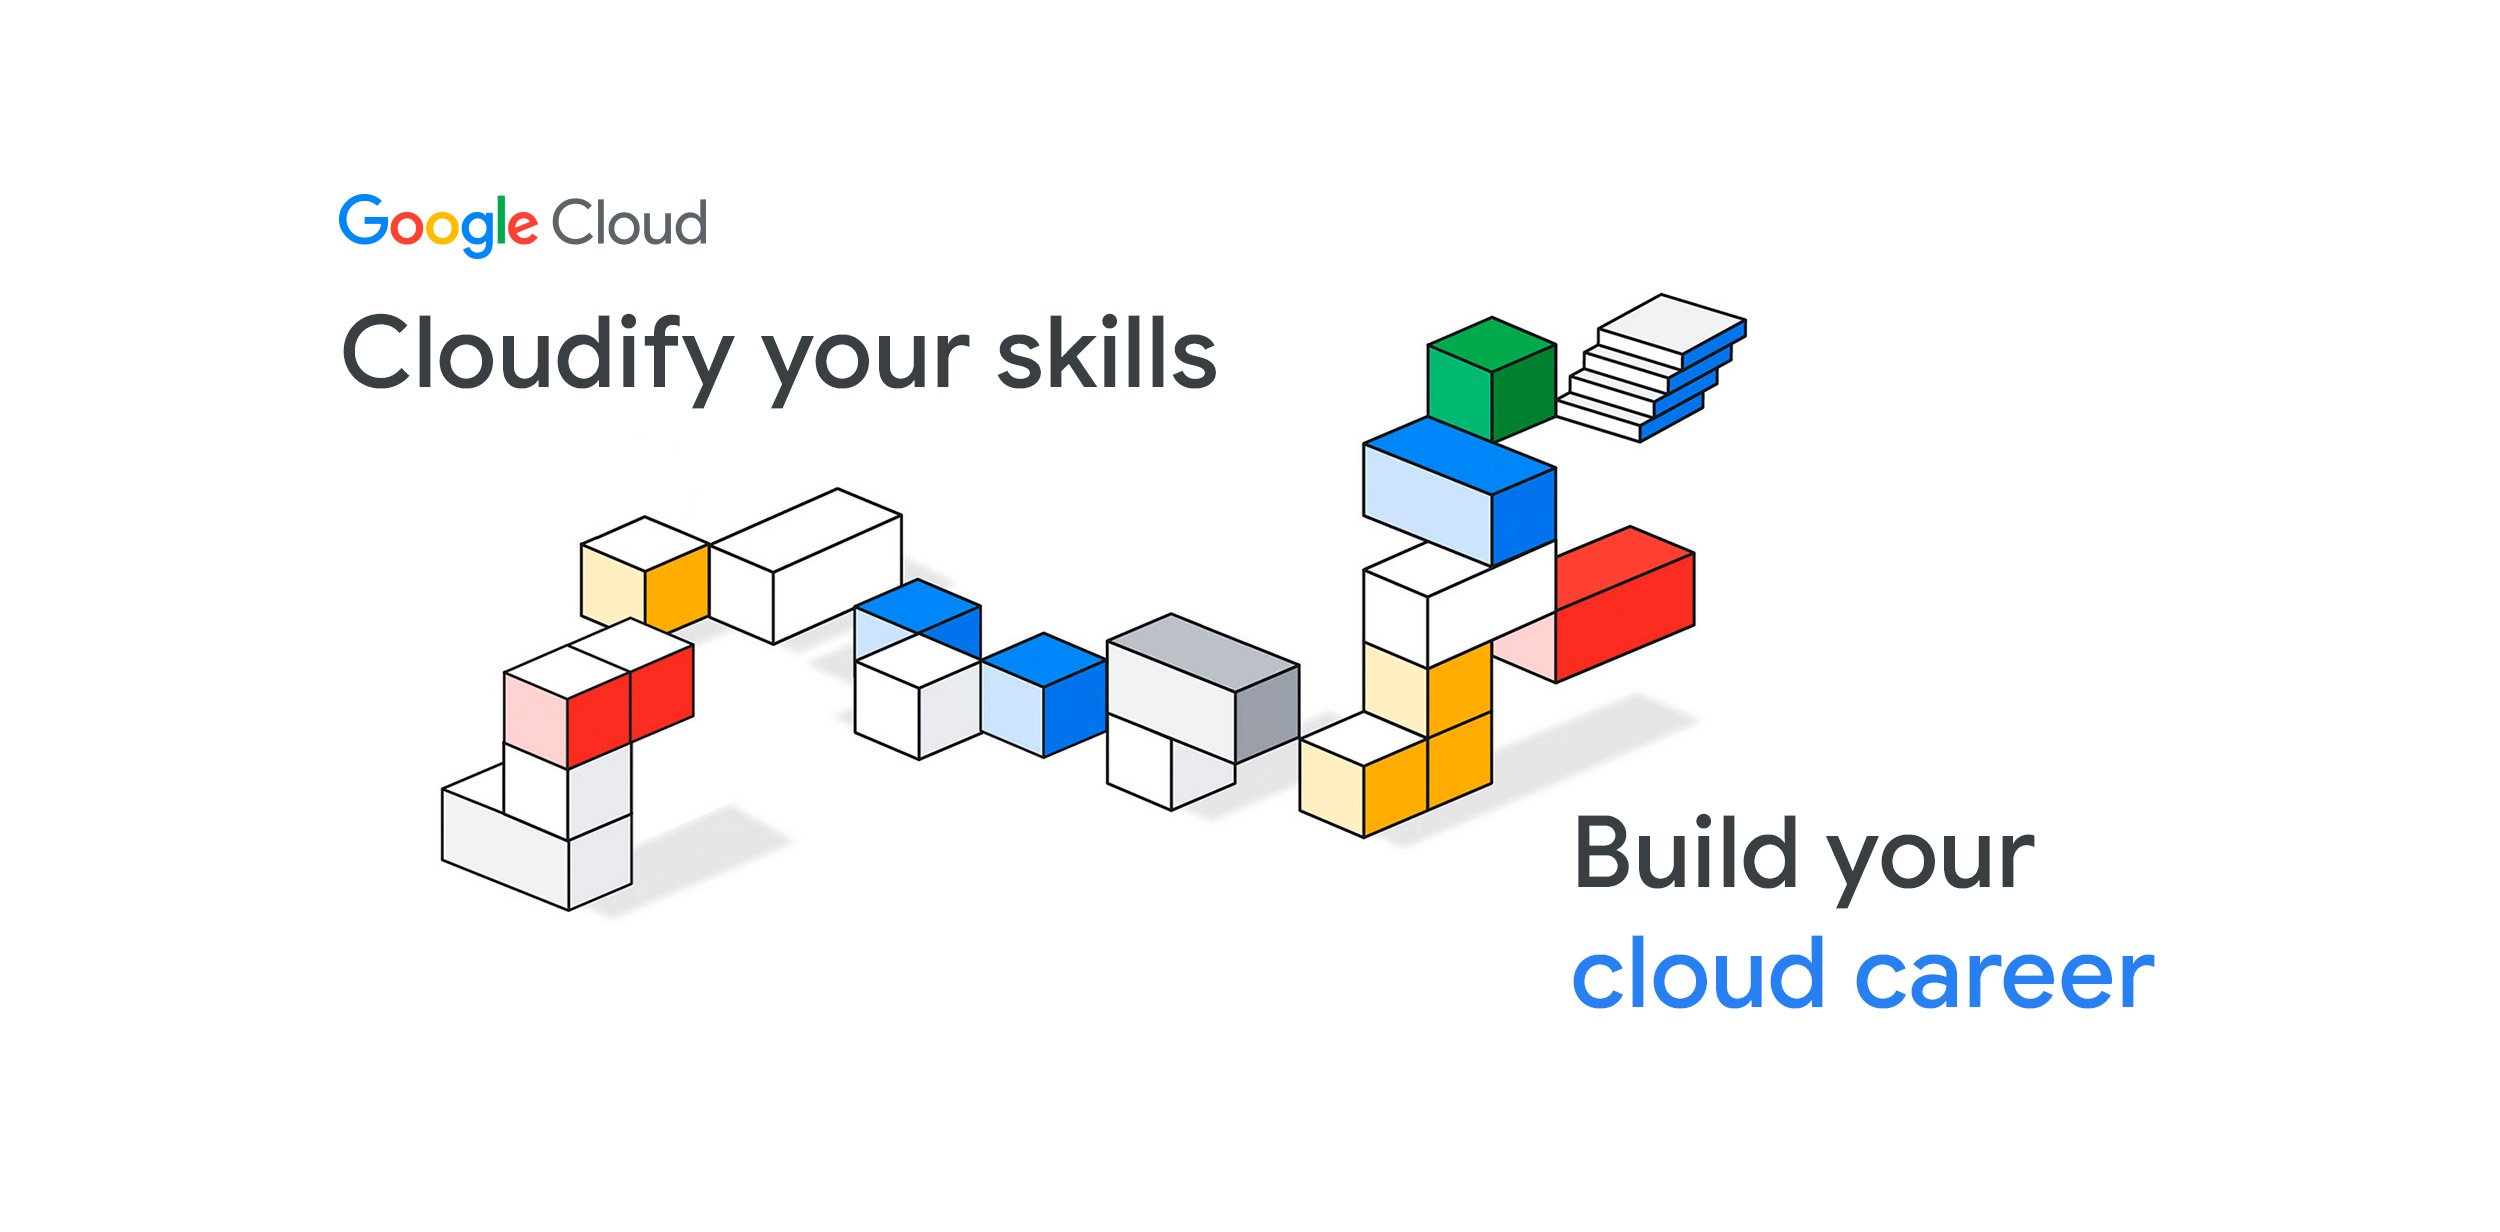 Start your cloud career in 2023 - tips from Google Cloud